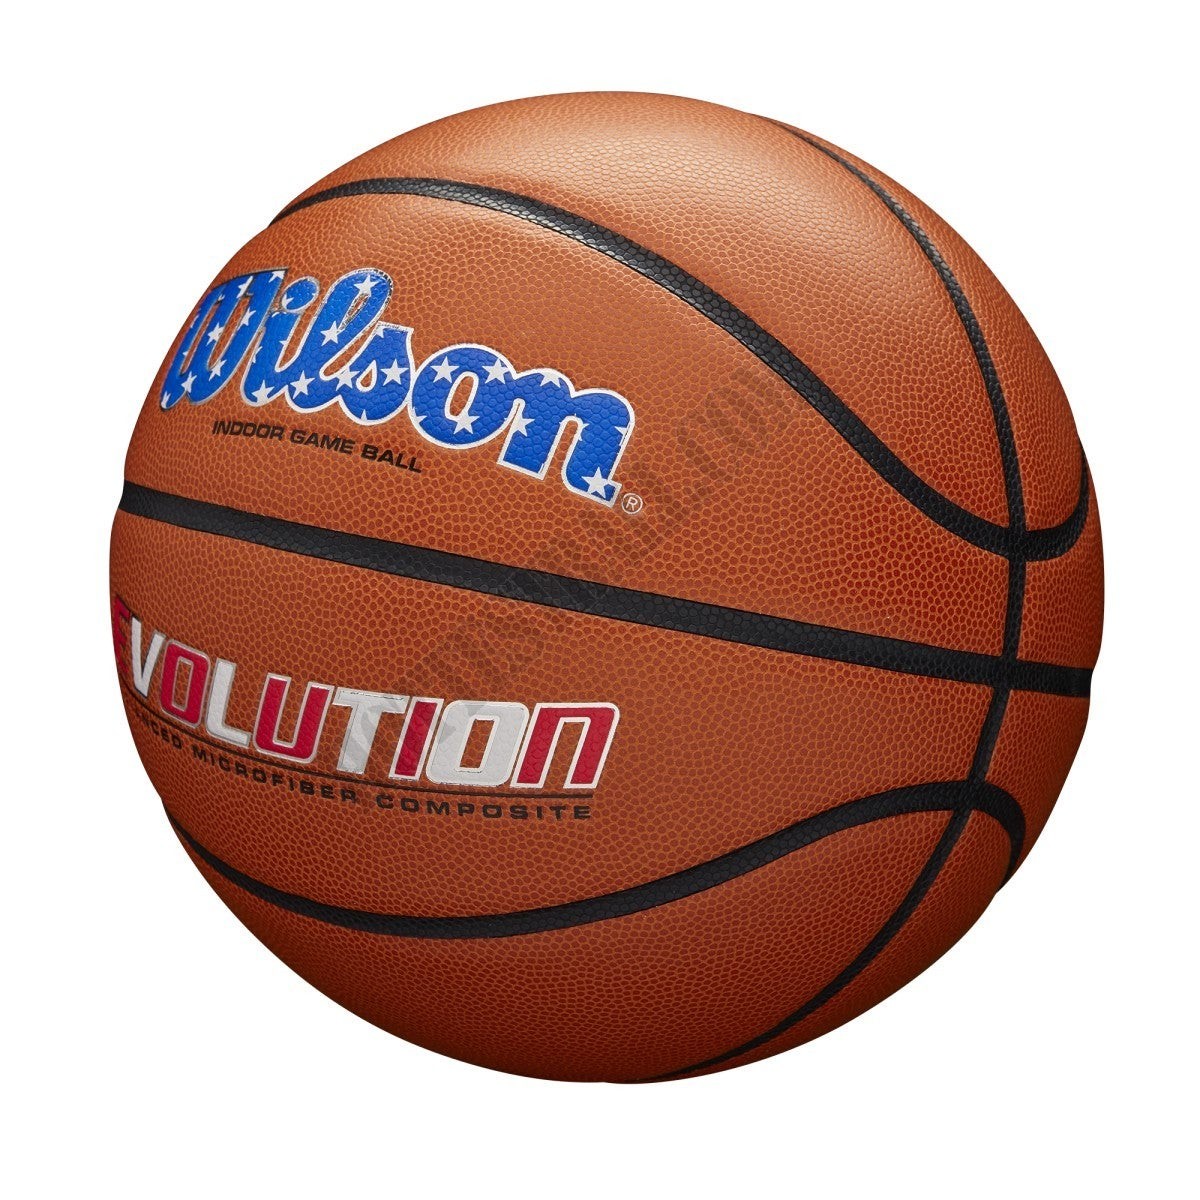 USA Special Edition Evolution Basketball - Wilson Discount Store - -1